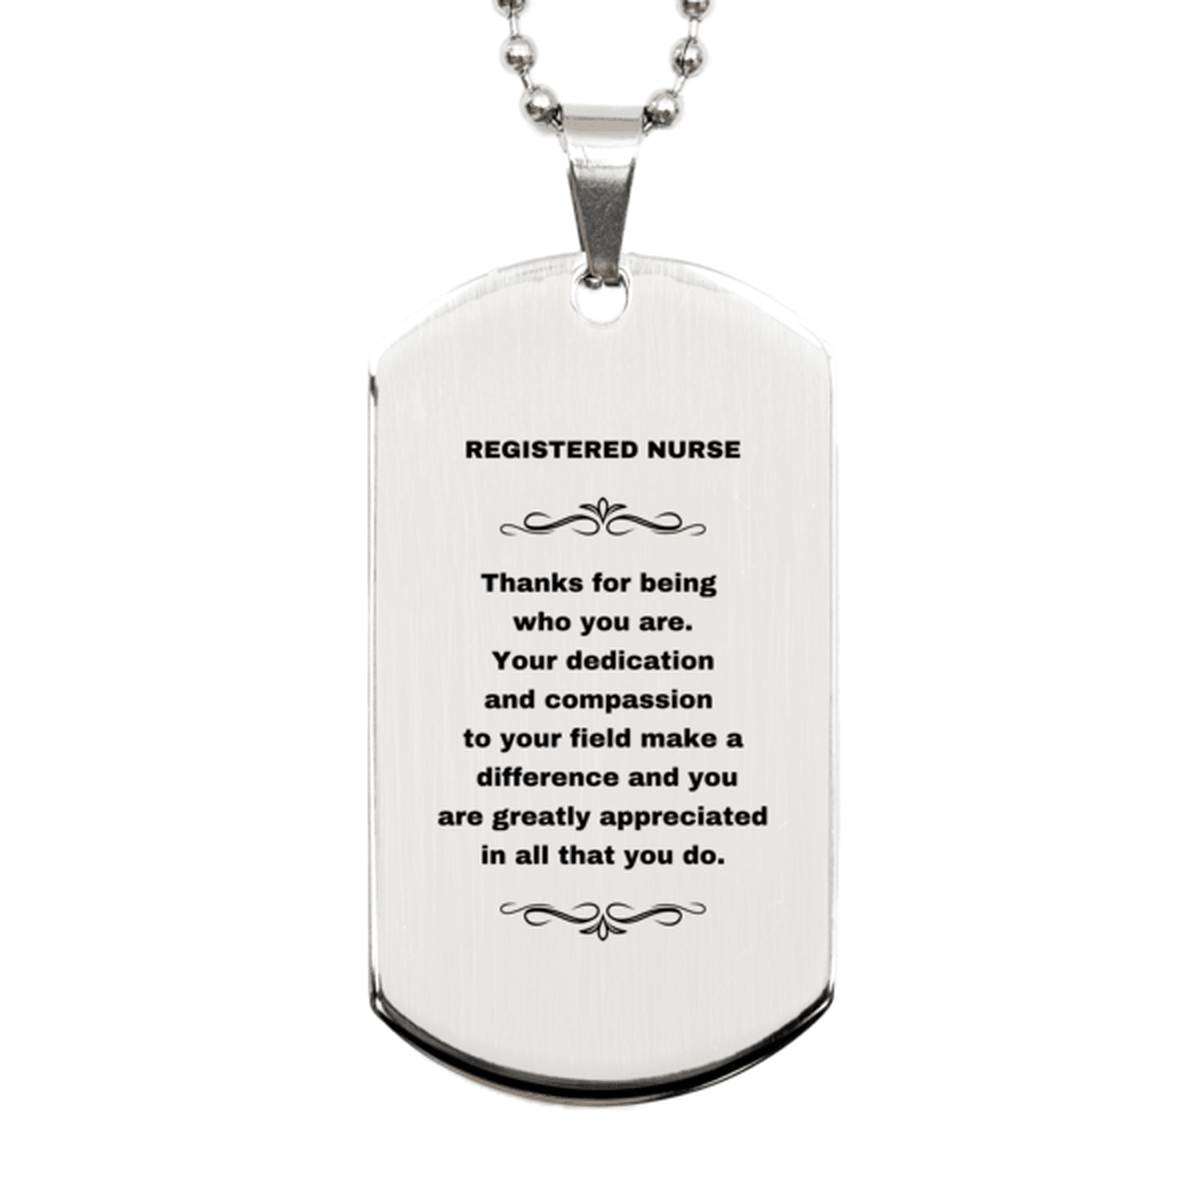 Registered Nurse Silver Dog Tag Engraved Necklace - Thanks for being who you are - Birthday Christmas Jewelry Gifts Coworkers Colleague Boss - Mallard Moon Gift Shop